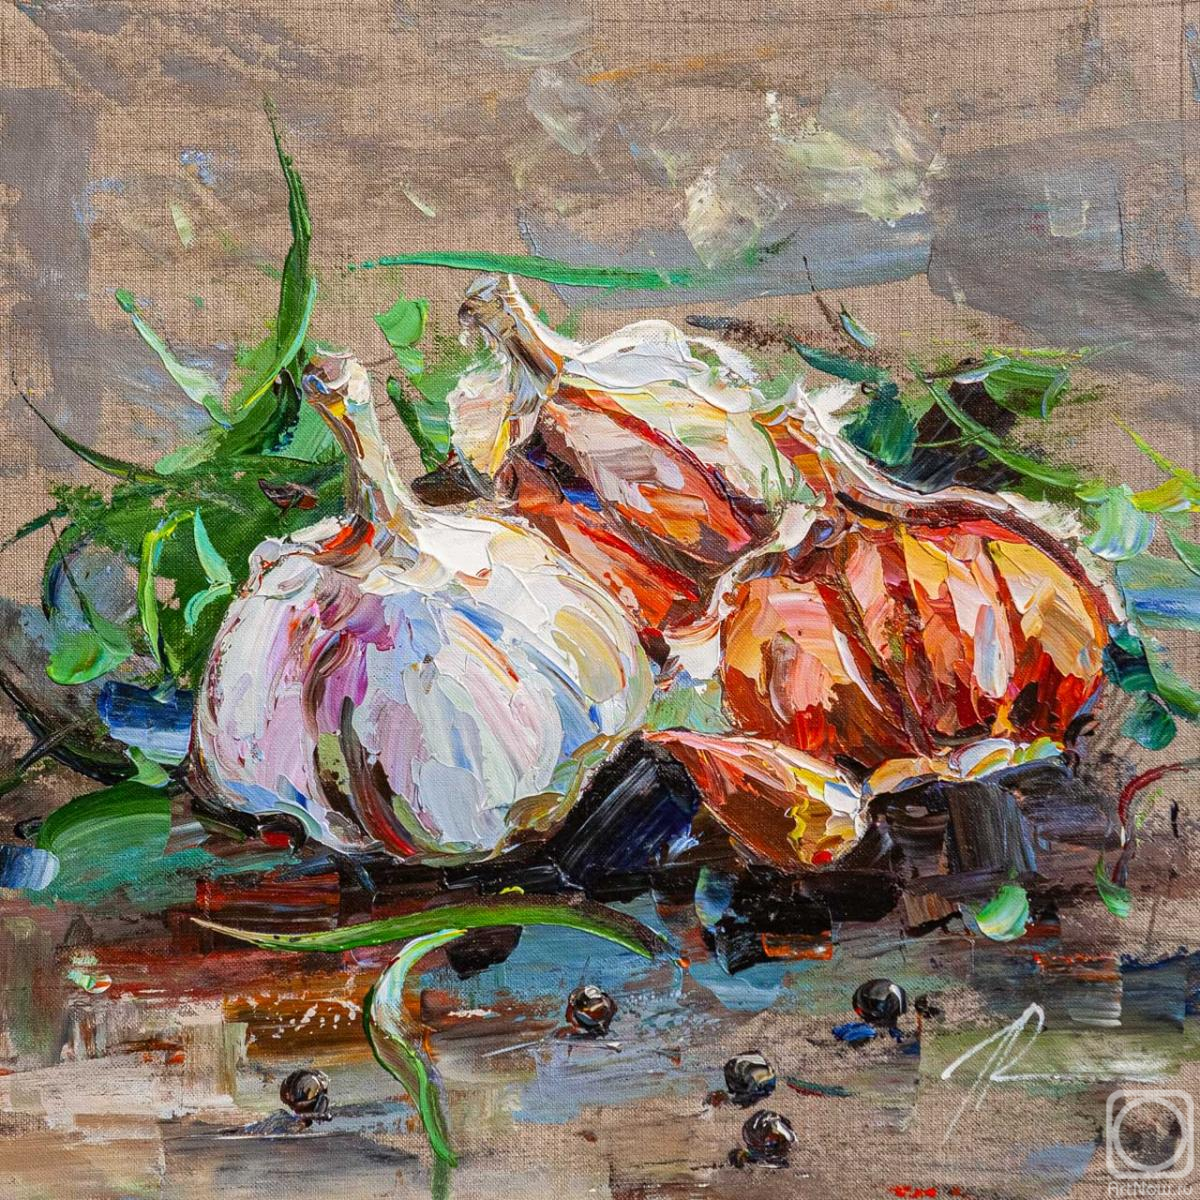 Rodries Jose. Still life with garlic and herbs